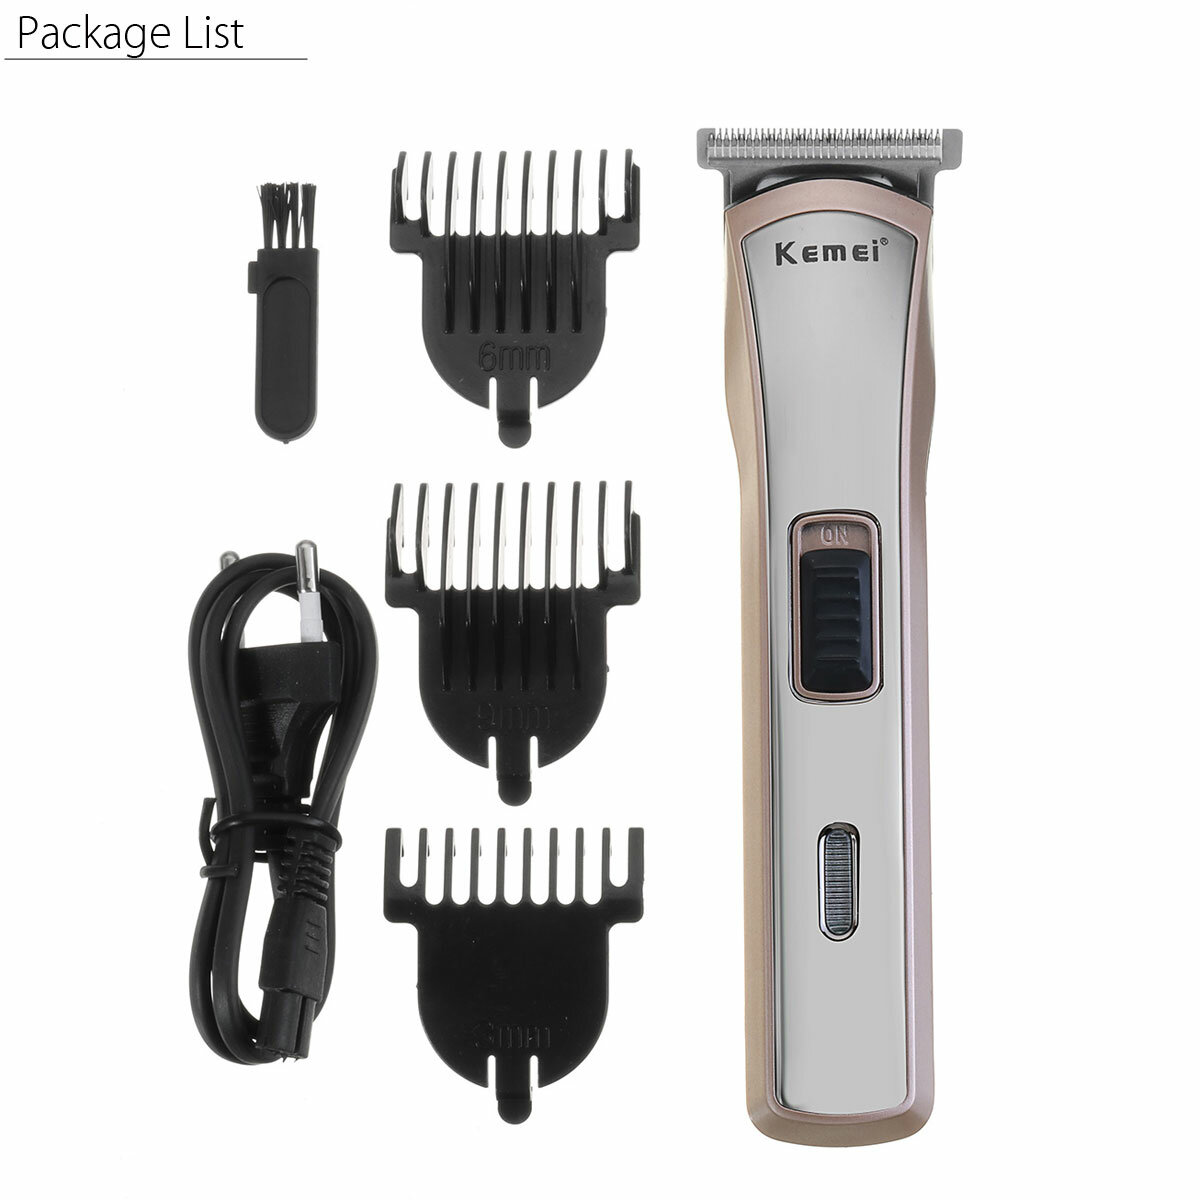 best price,kemei,precision,cut,hair,clipper,coupon,price,discount